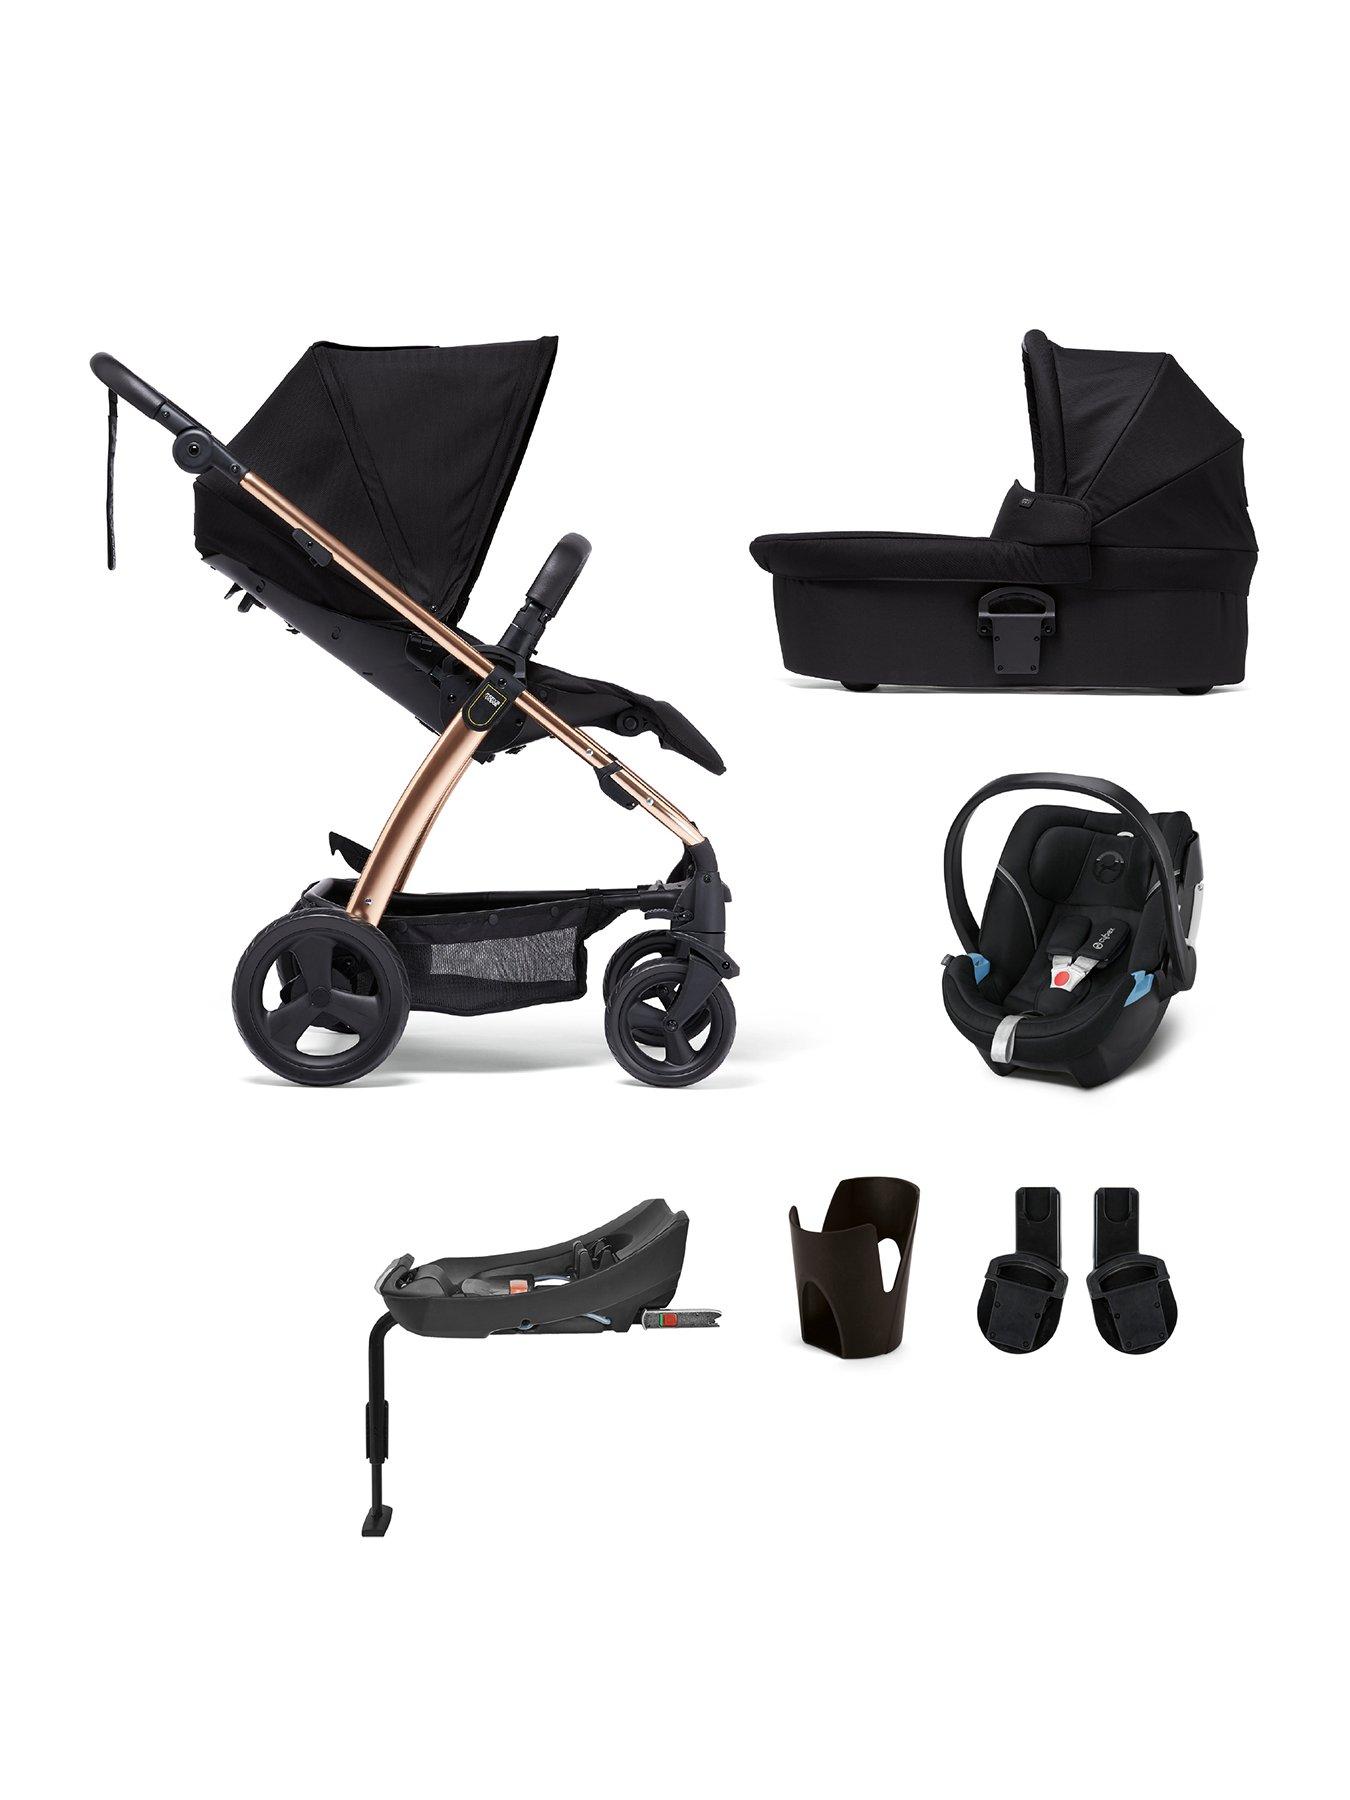 sola 2 pushchair review